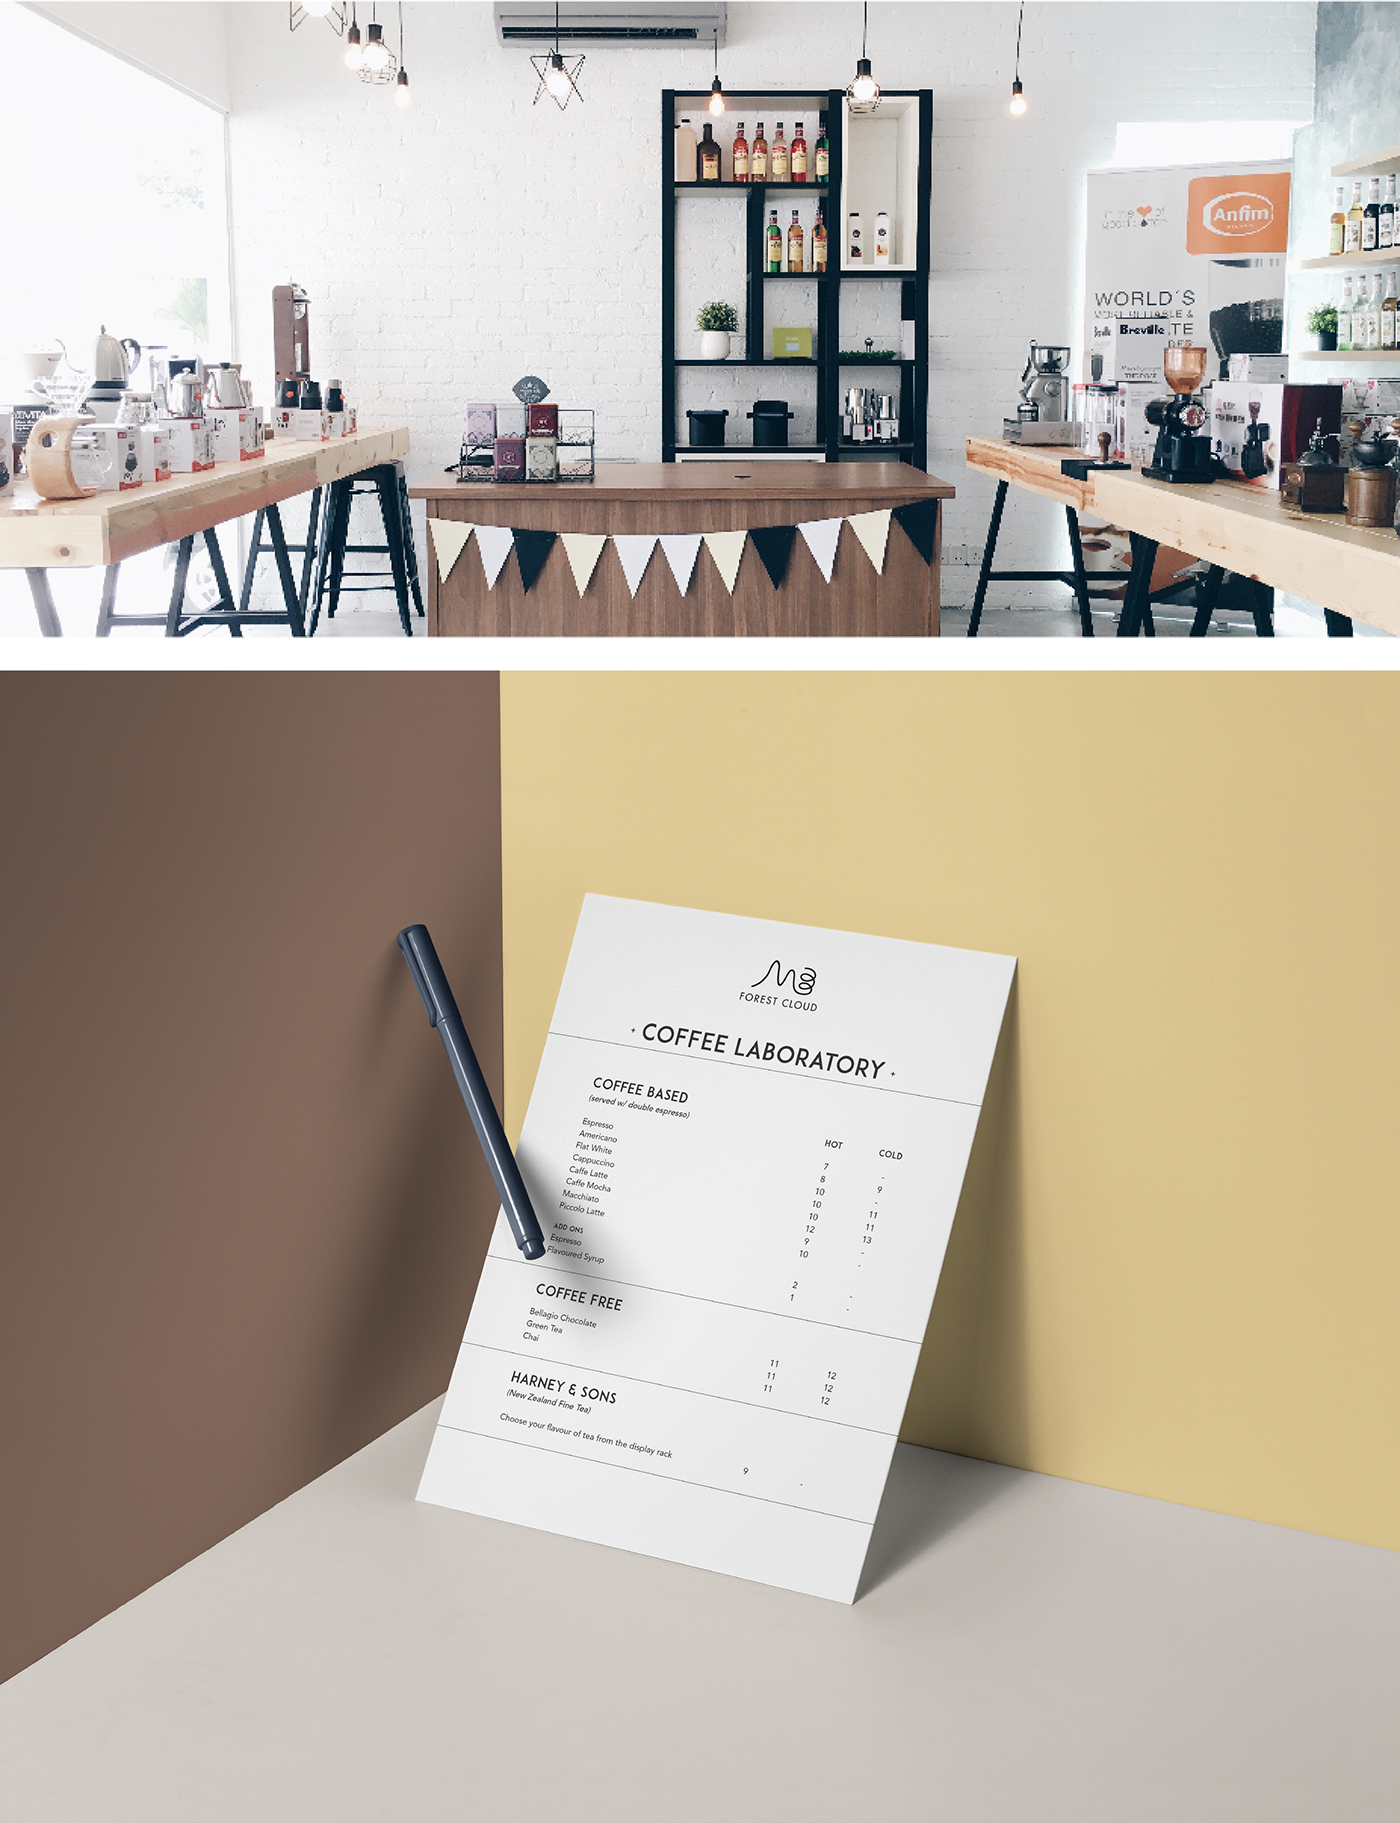 visual identity cafe branding coffee branding Photography  Icon design graphic branding  cafe poster